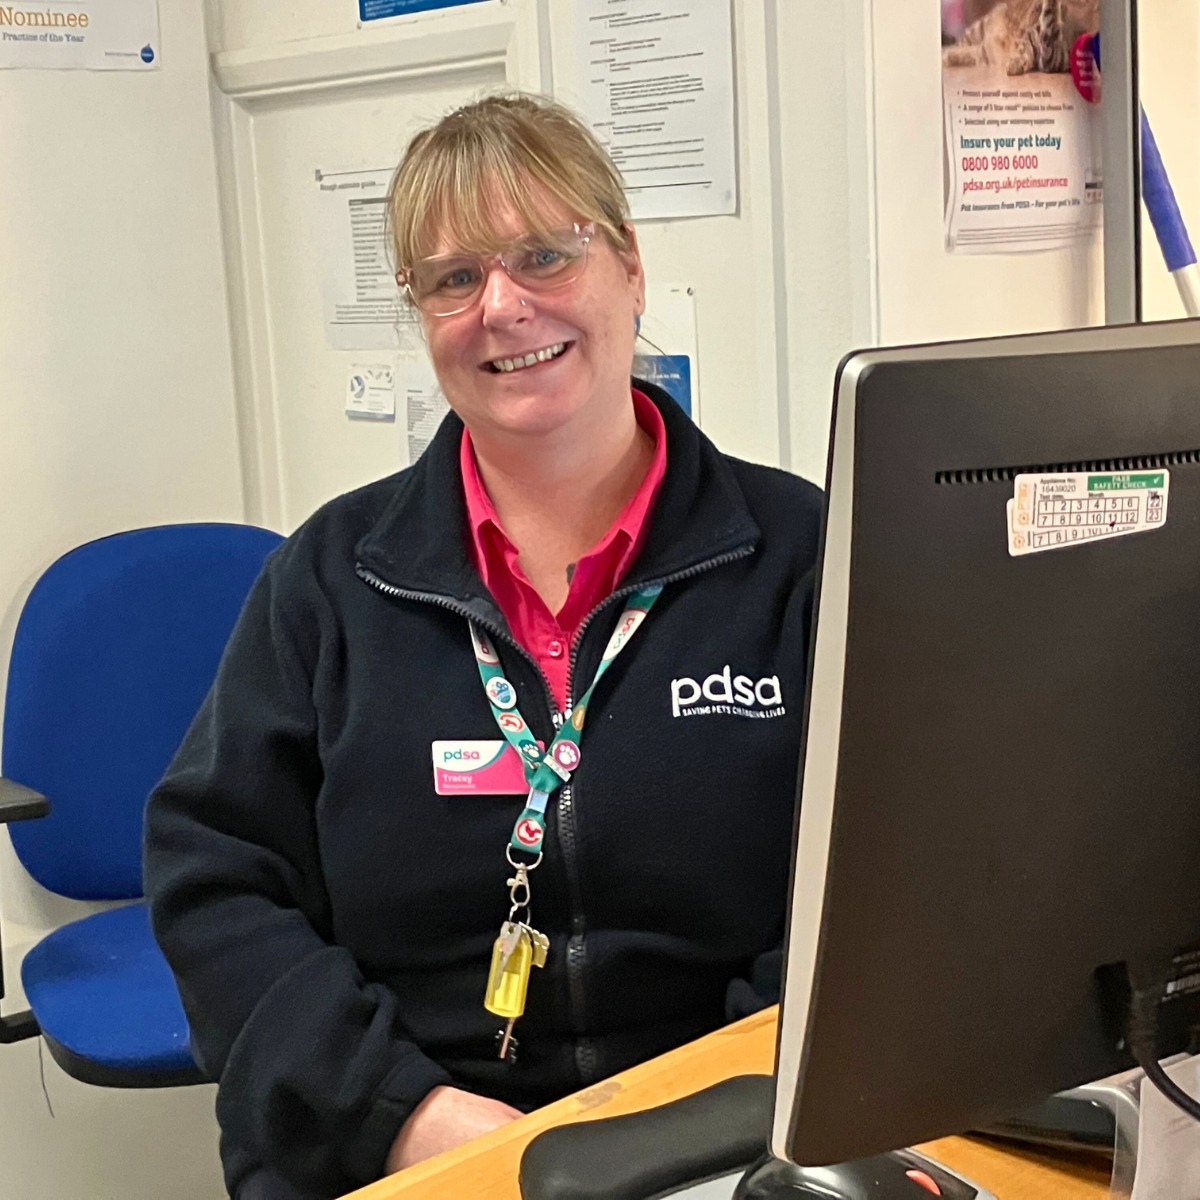 We'd like to give a big shoutout to all of our wonderful Receptionists this #NationalReceptionistsDay 👏 Thank you for being a vital part of what we do in the name of helping sick and injured #Pets ❤️ Search our current vacancies 👉 pdsa.me/NDbE